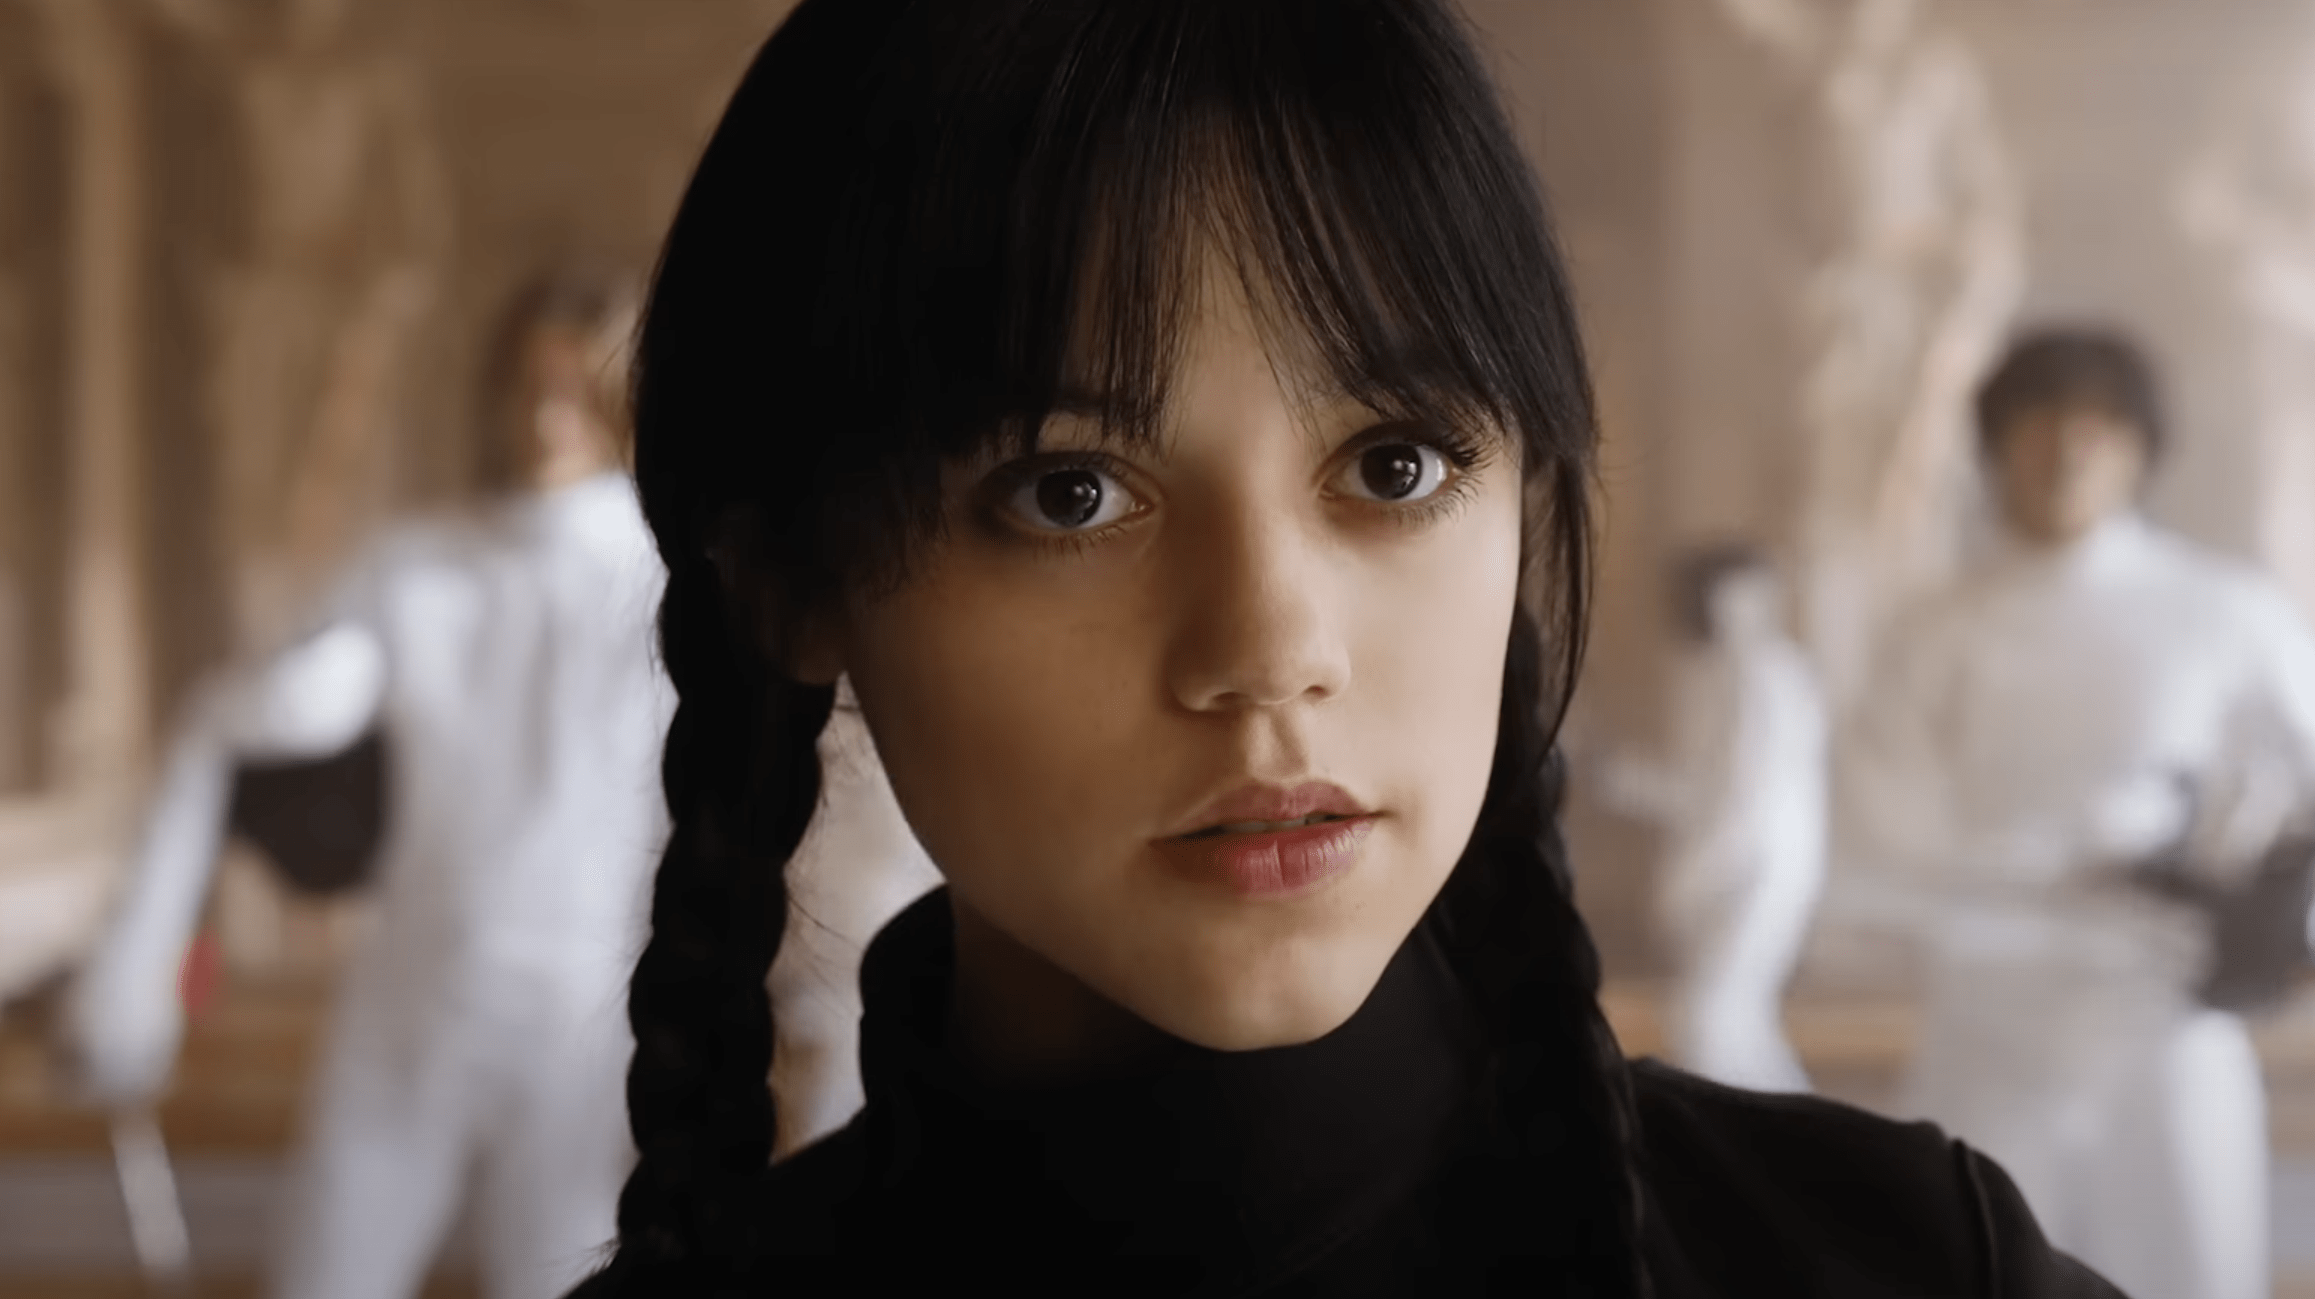 First look at Jenna Ortega as Wednesday Addams